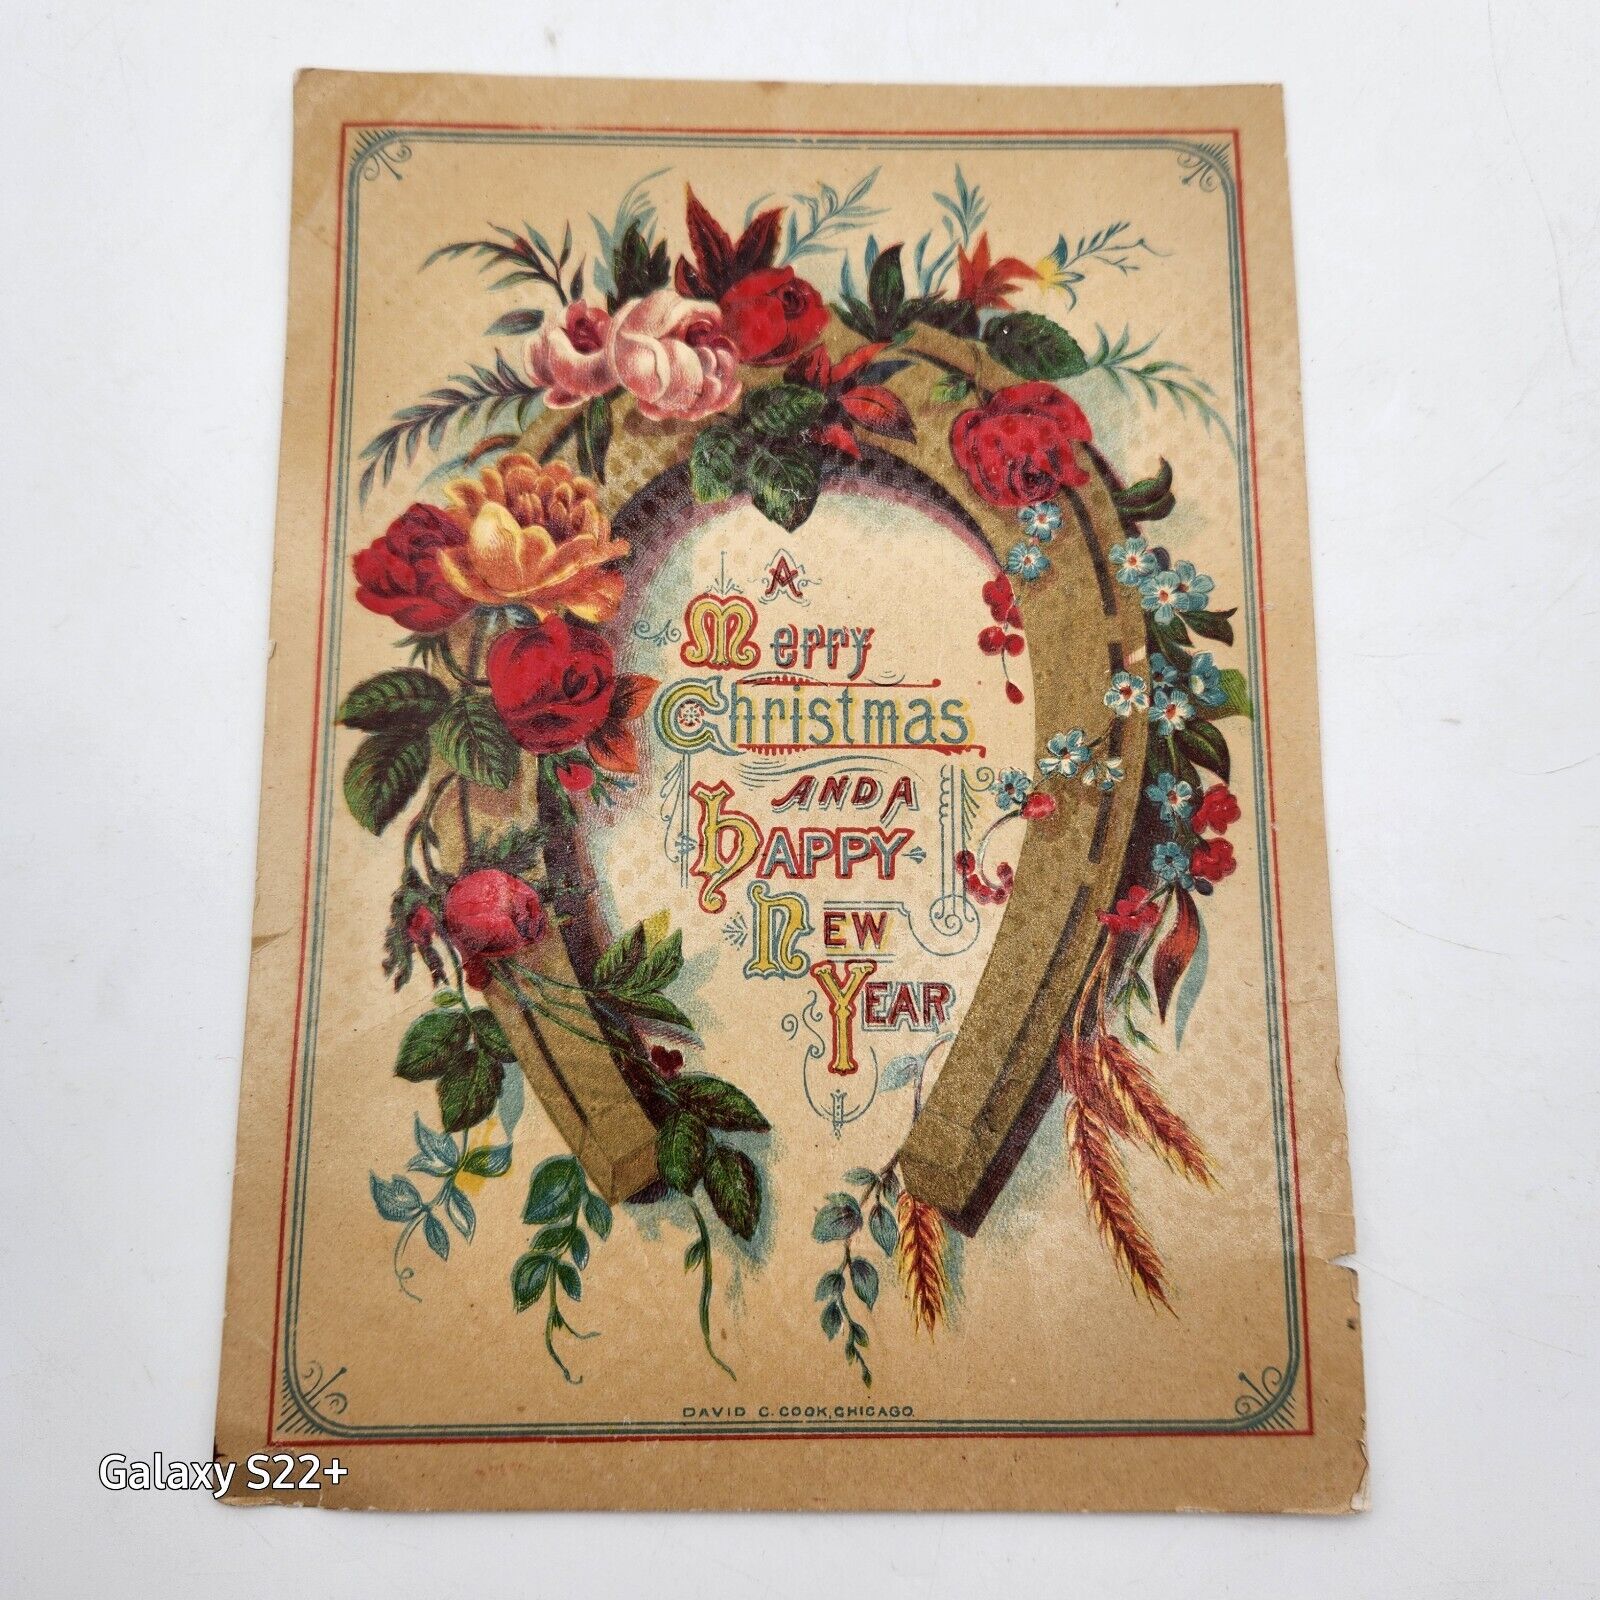 Antique 1980\'s David C. Cook Chicago IL Victorian Trade Card Merry Christmas